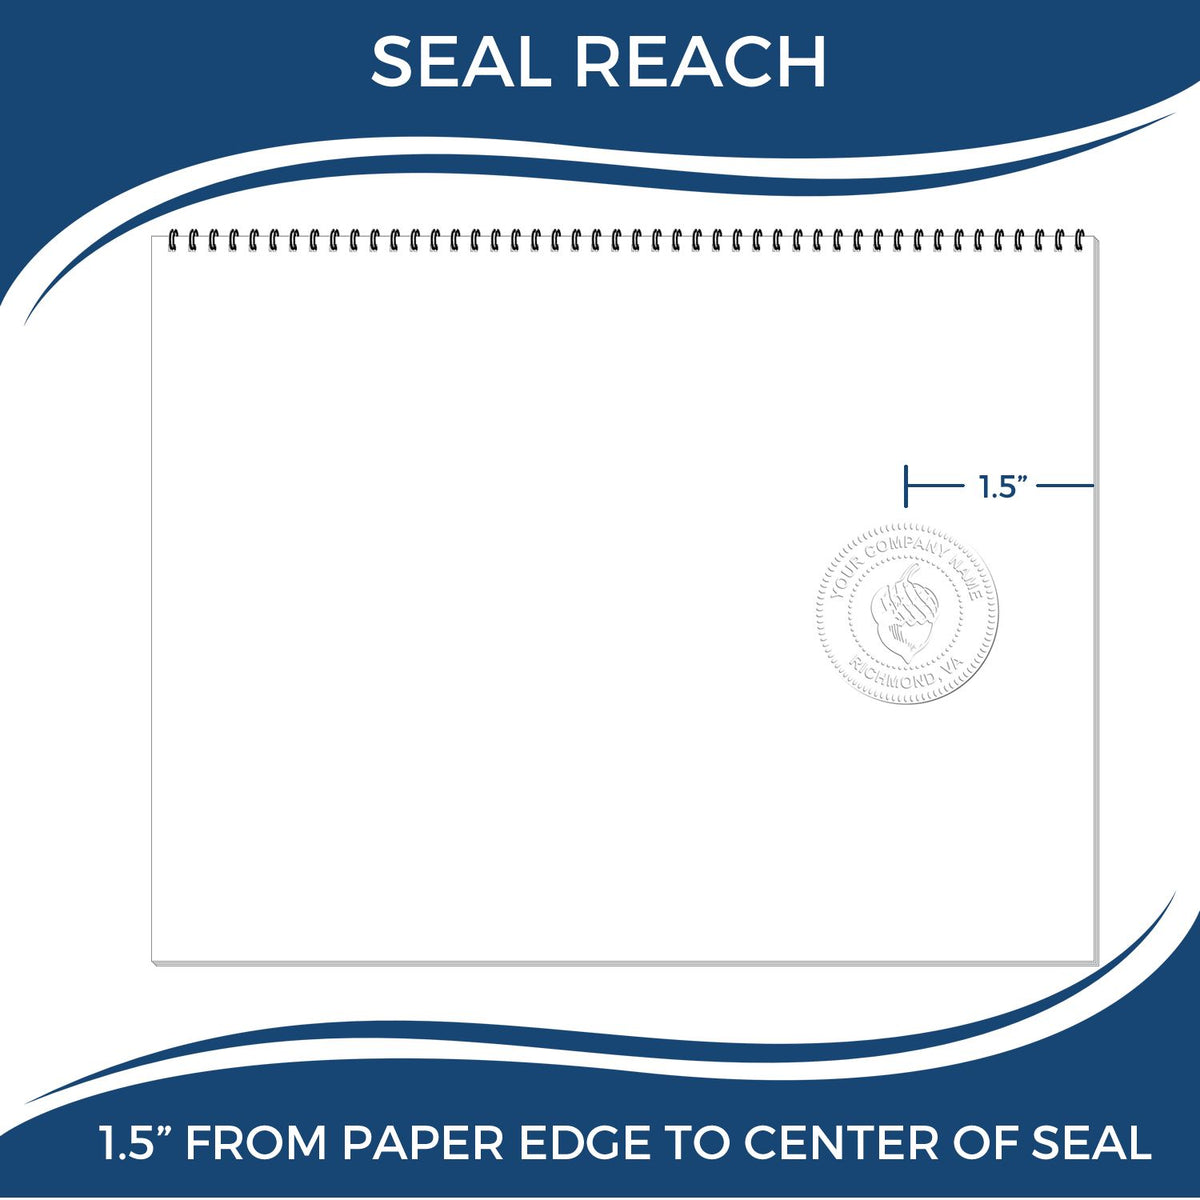 An infographic showing the seal reach which is represented by a ruler and a miniature seal image of the Soft Maryland Professional Geologist Seal